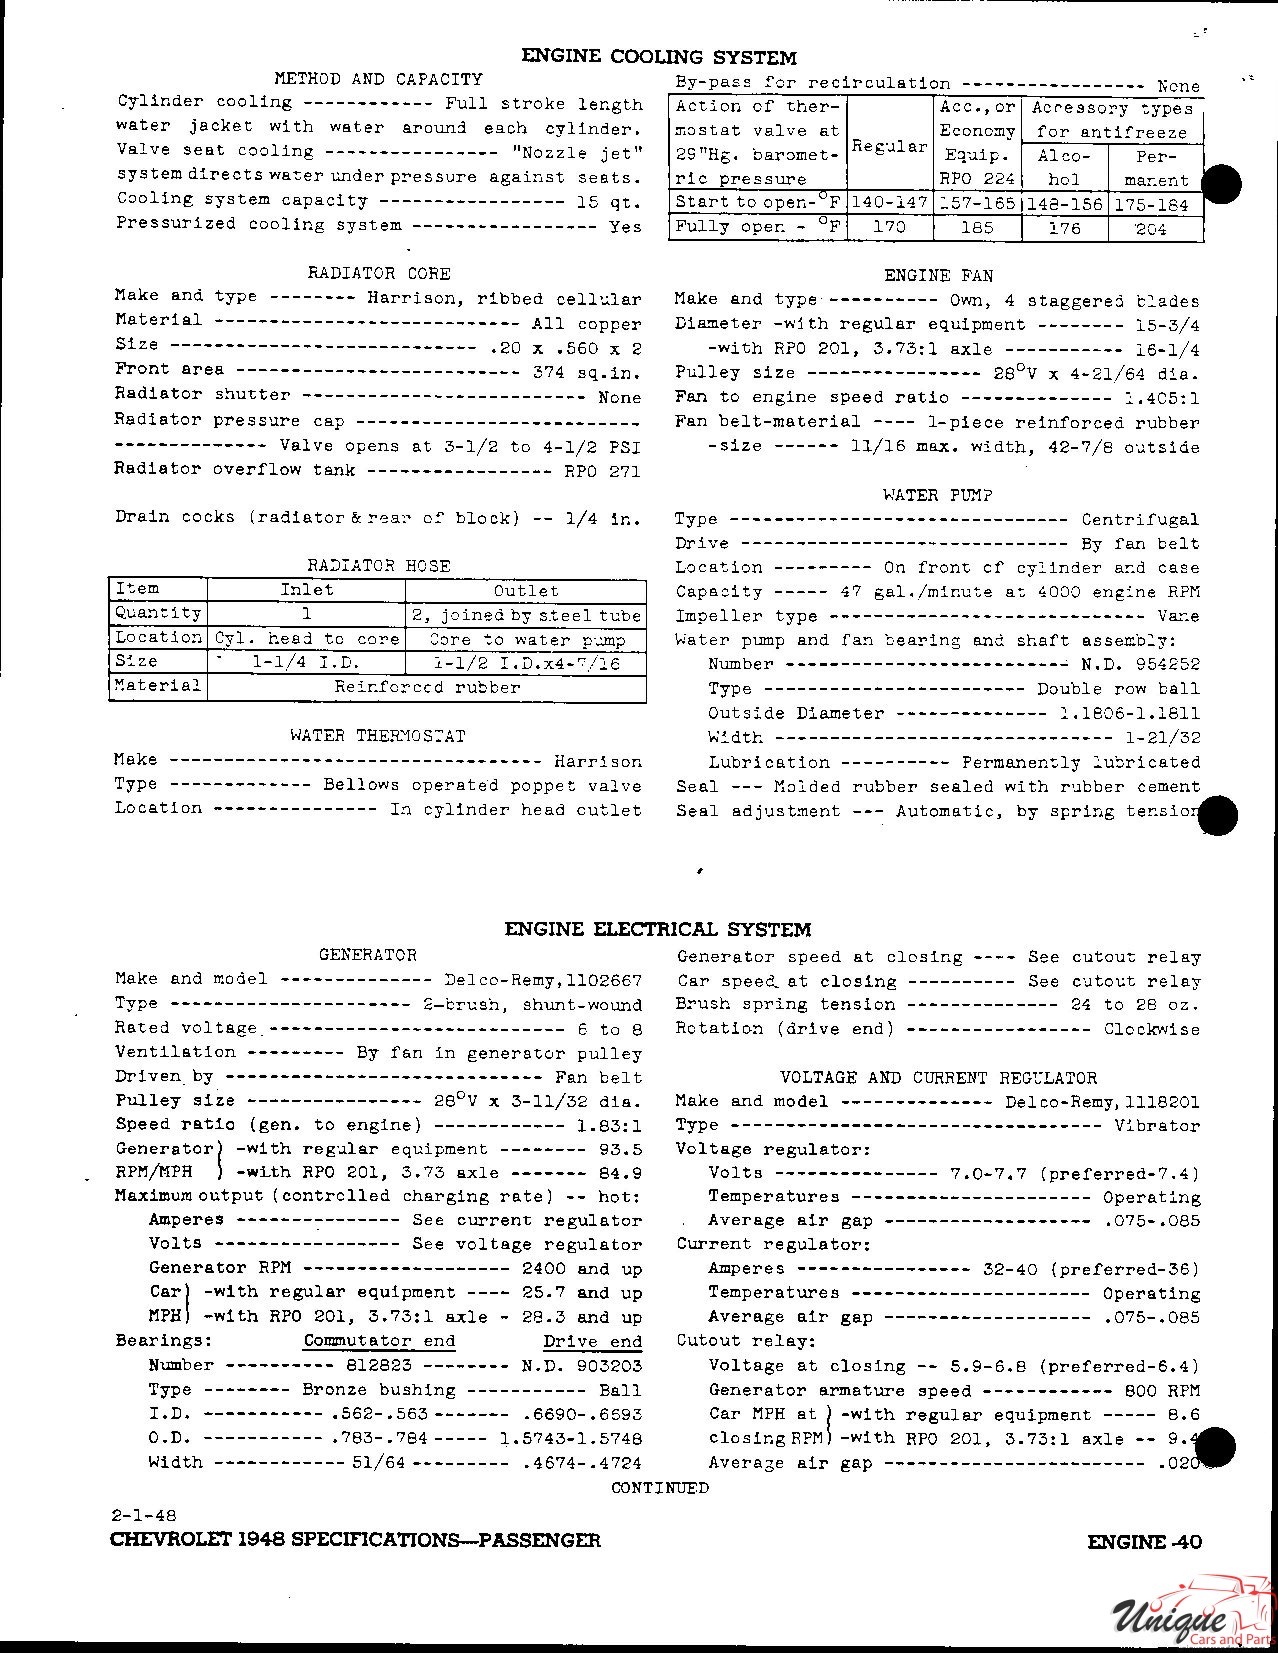 1948 Chevrolet Specifications Page 5